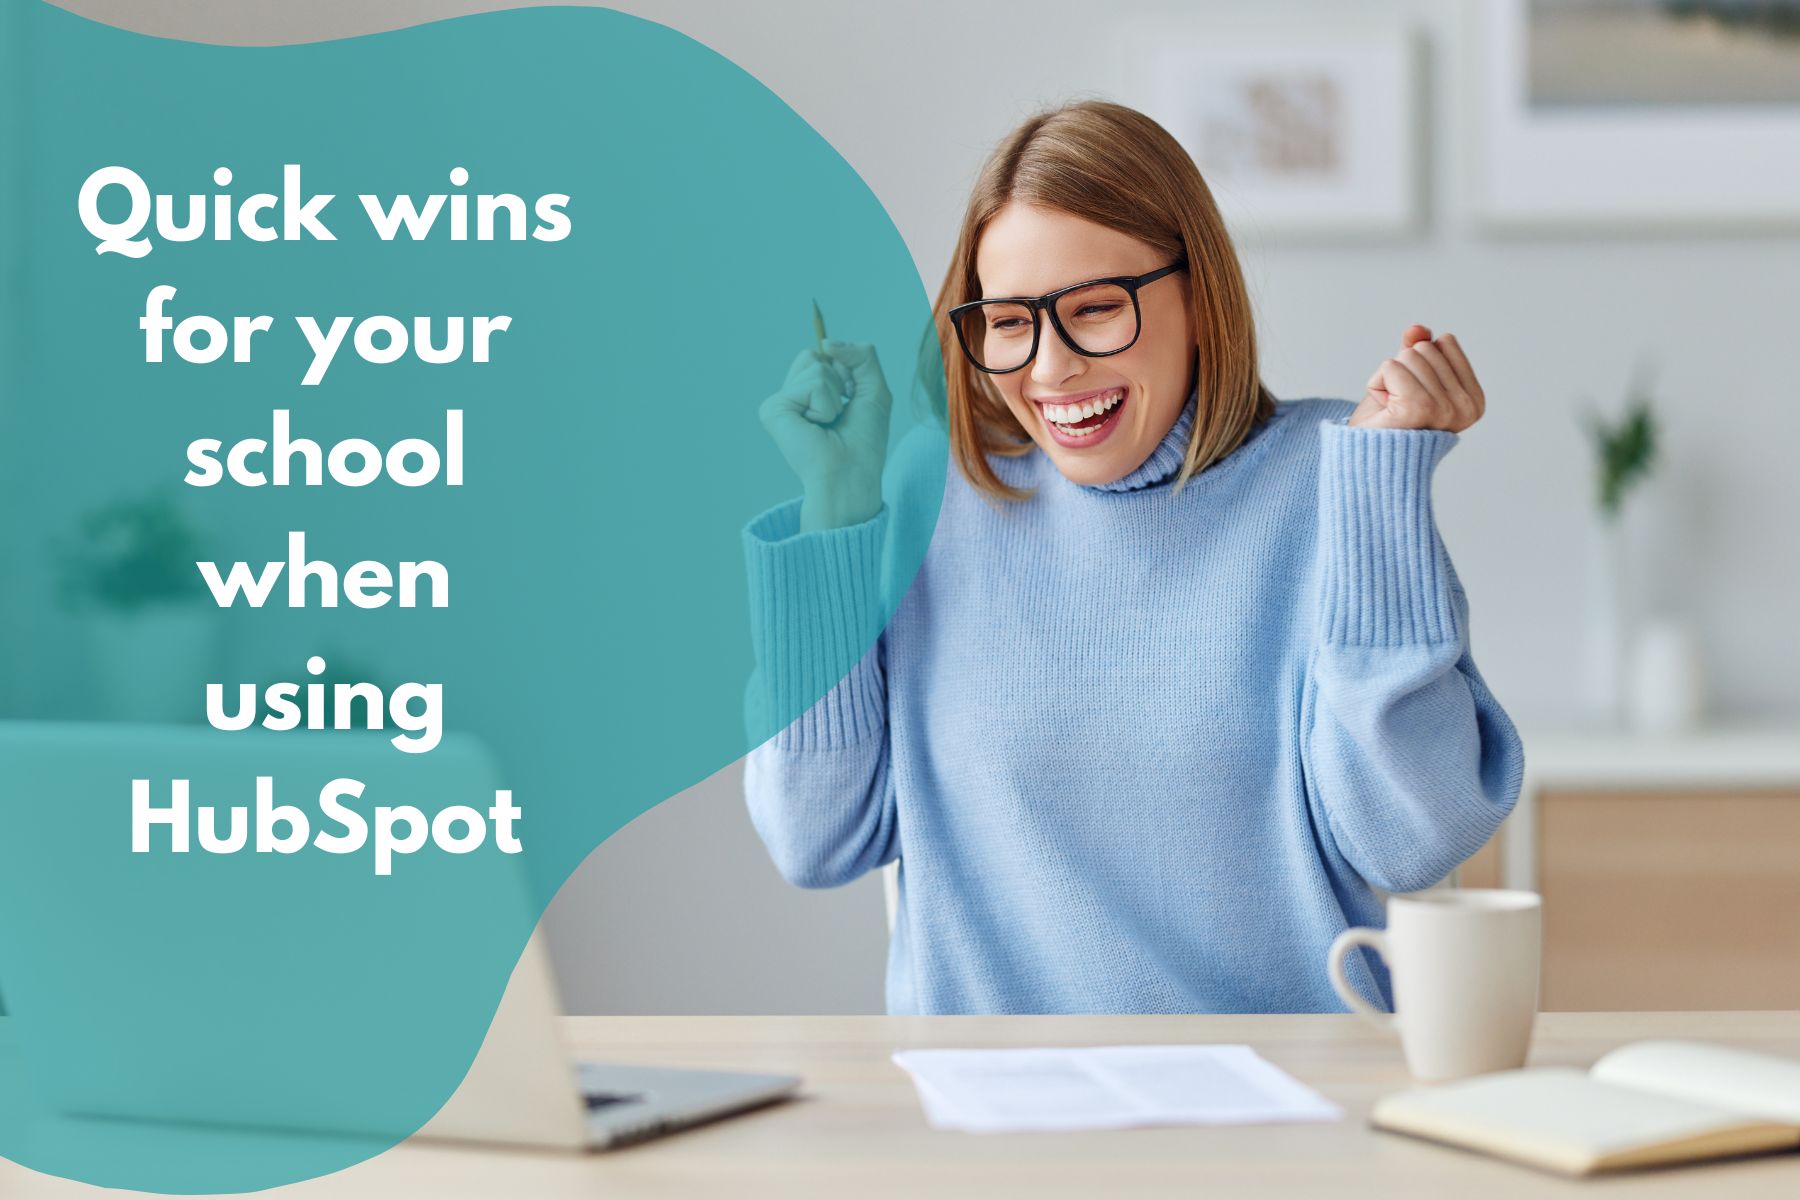 Quick wins for your school when using HubSpot